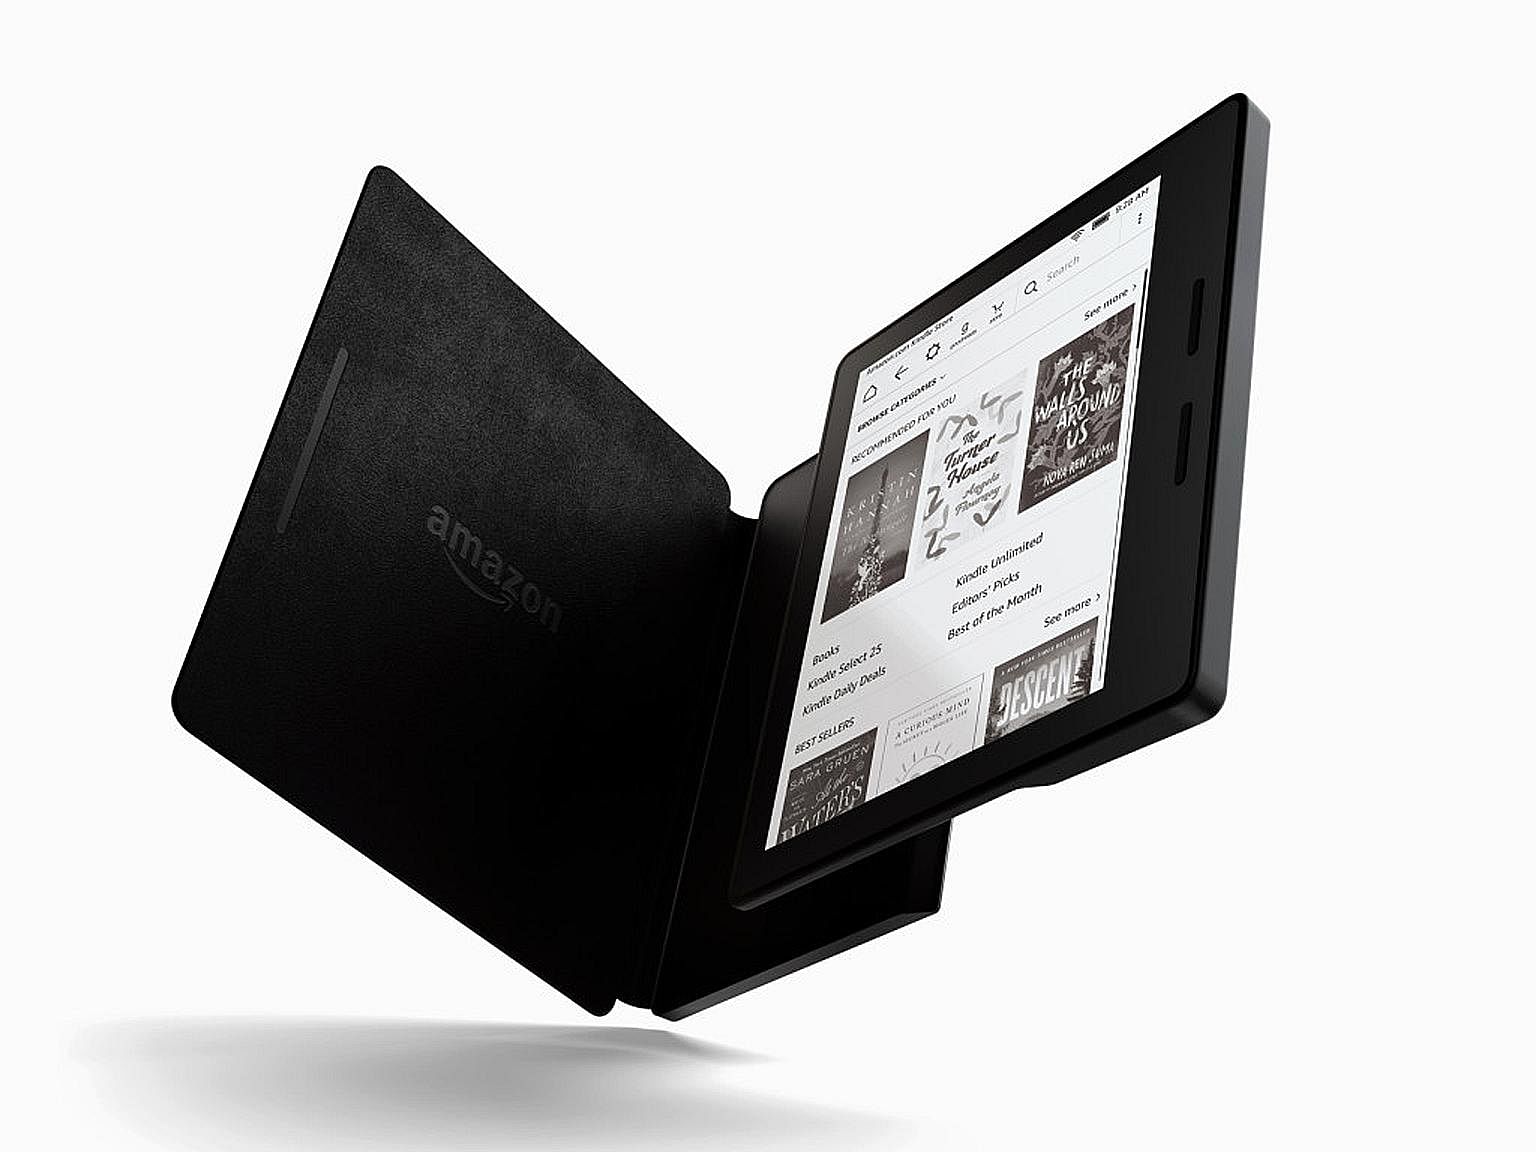 Its price tag of US$289.99 makes the Kindle Oasis the most expensive e-reader in the market.